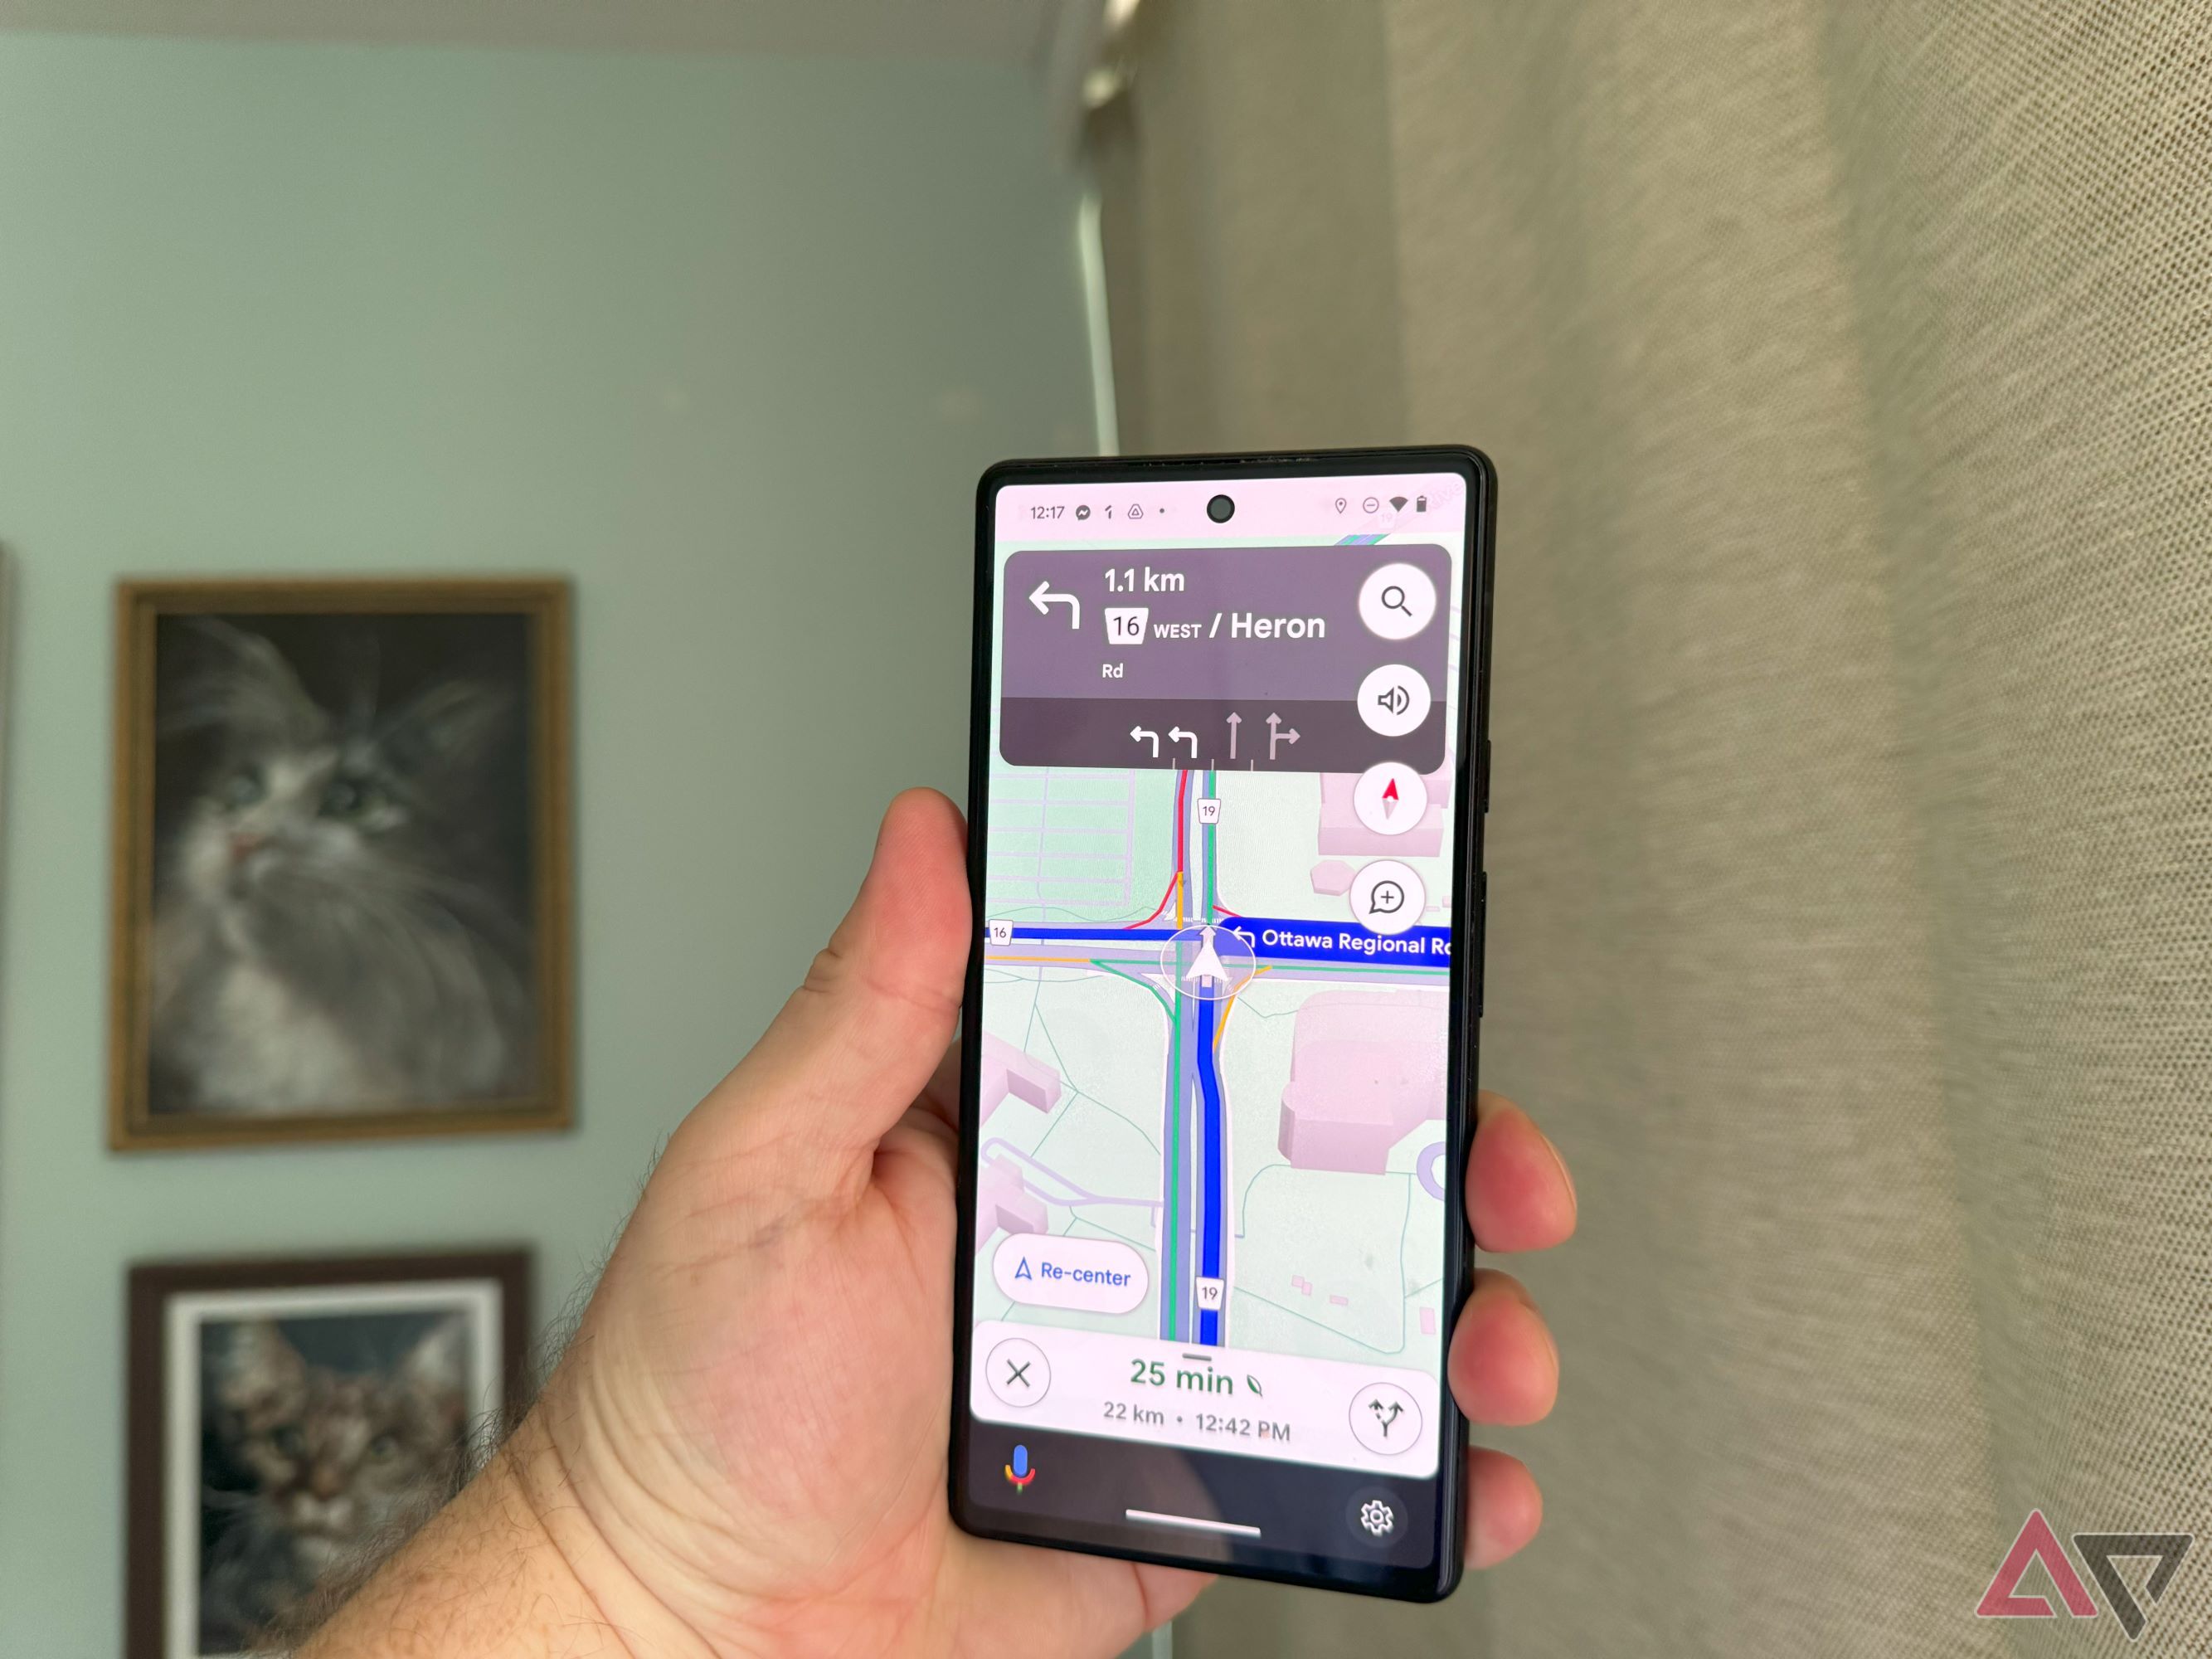 A hand holding a Pixel 6 with Google Maps open showing its lane assist function.